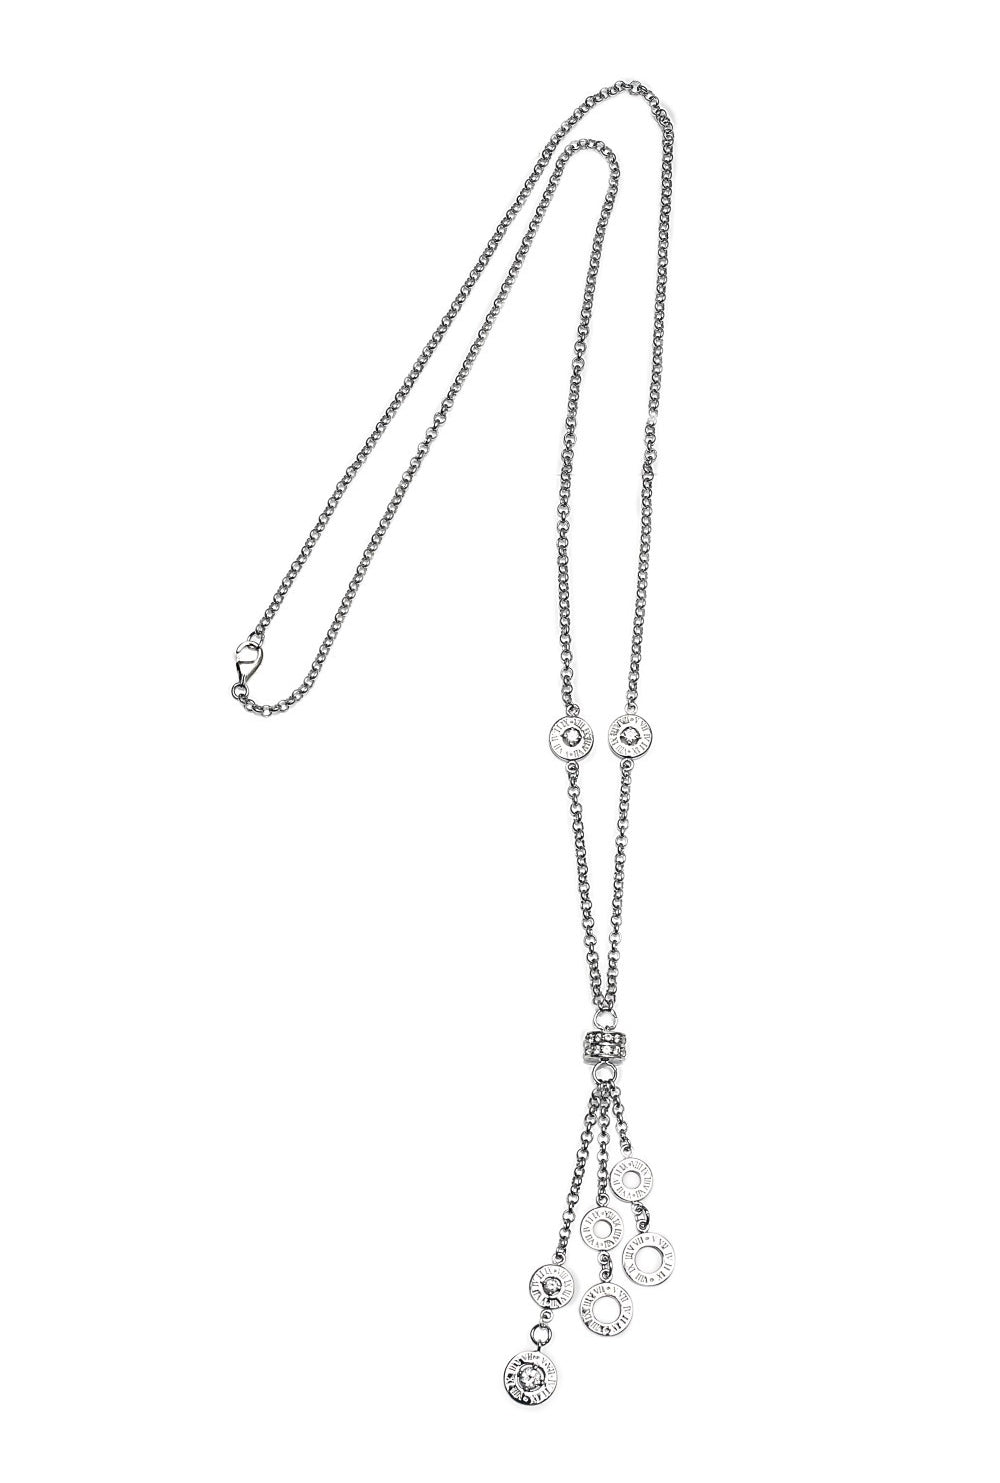 Eden Stone Grace Long Necklace in 925 sterling silver featuring strands that hold several circles embedded with cubic zirconia stones and Roman Numerals. Matching rings and earrings are available. Affordable luxury jewellery by Bellagio & Co. Worldwide shipping plus FREE shipping for orders over $150 in Australia.